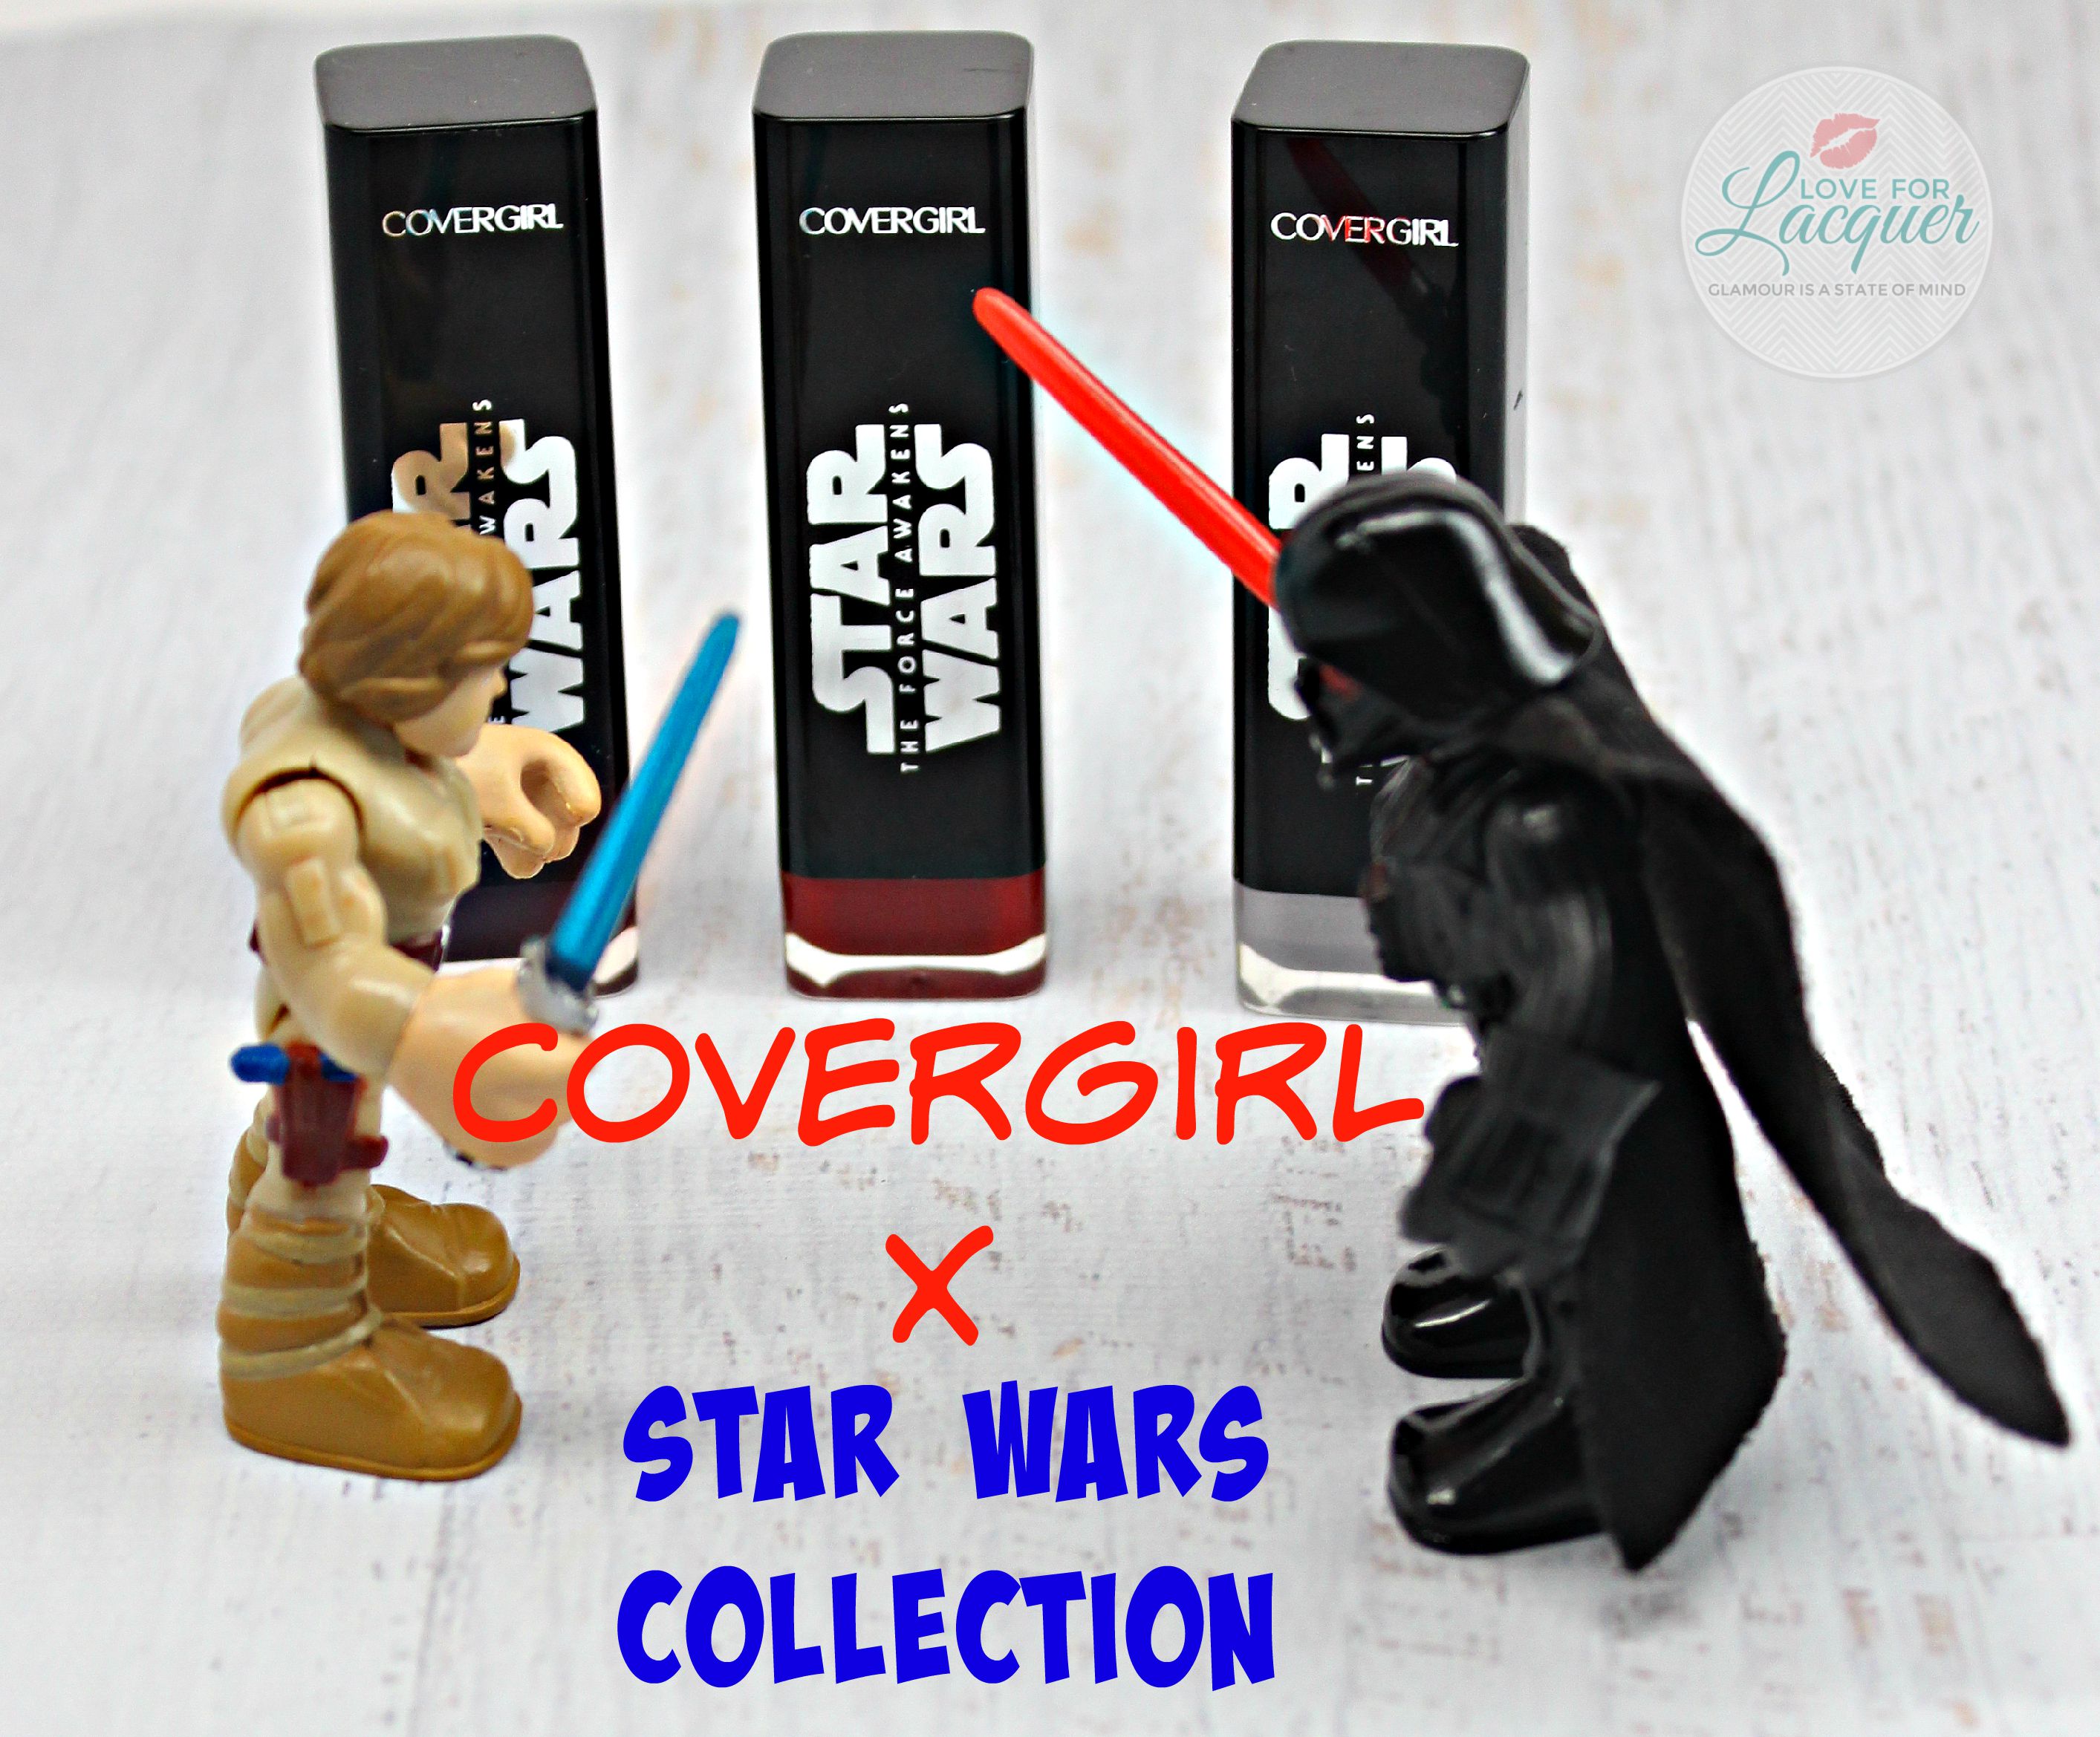 COVERGIRL x Star Wars Collection